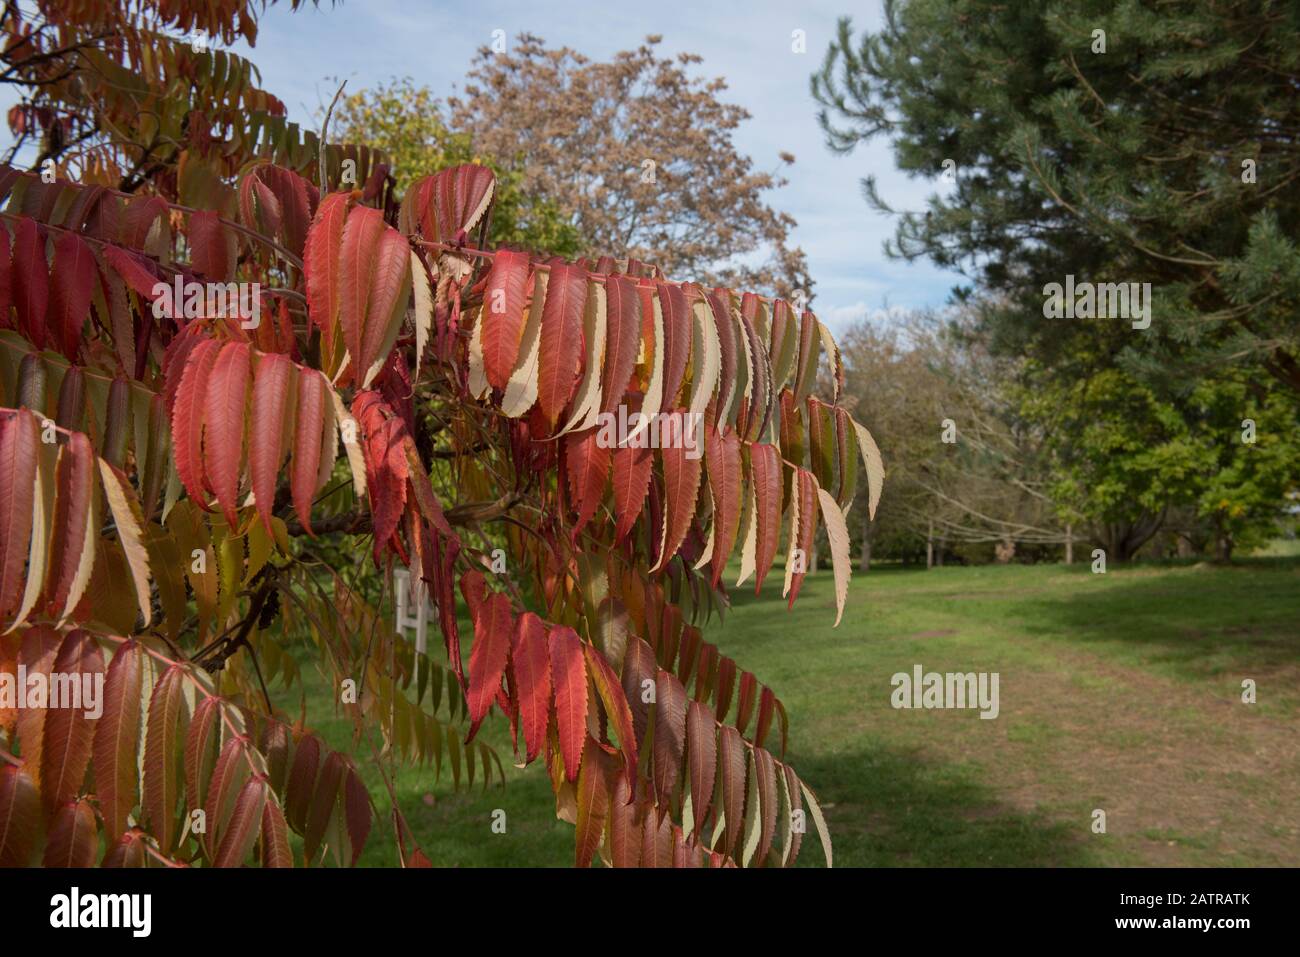 Brightly Coloured Autumn Leaves of the Deciduous Stag's Horn Sumach Tree (Rhus typhina 'Sinrus') in a Park in Rural Surrey, England, UK Stock Photo